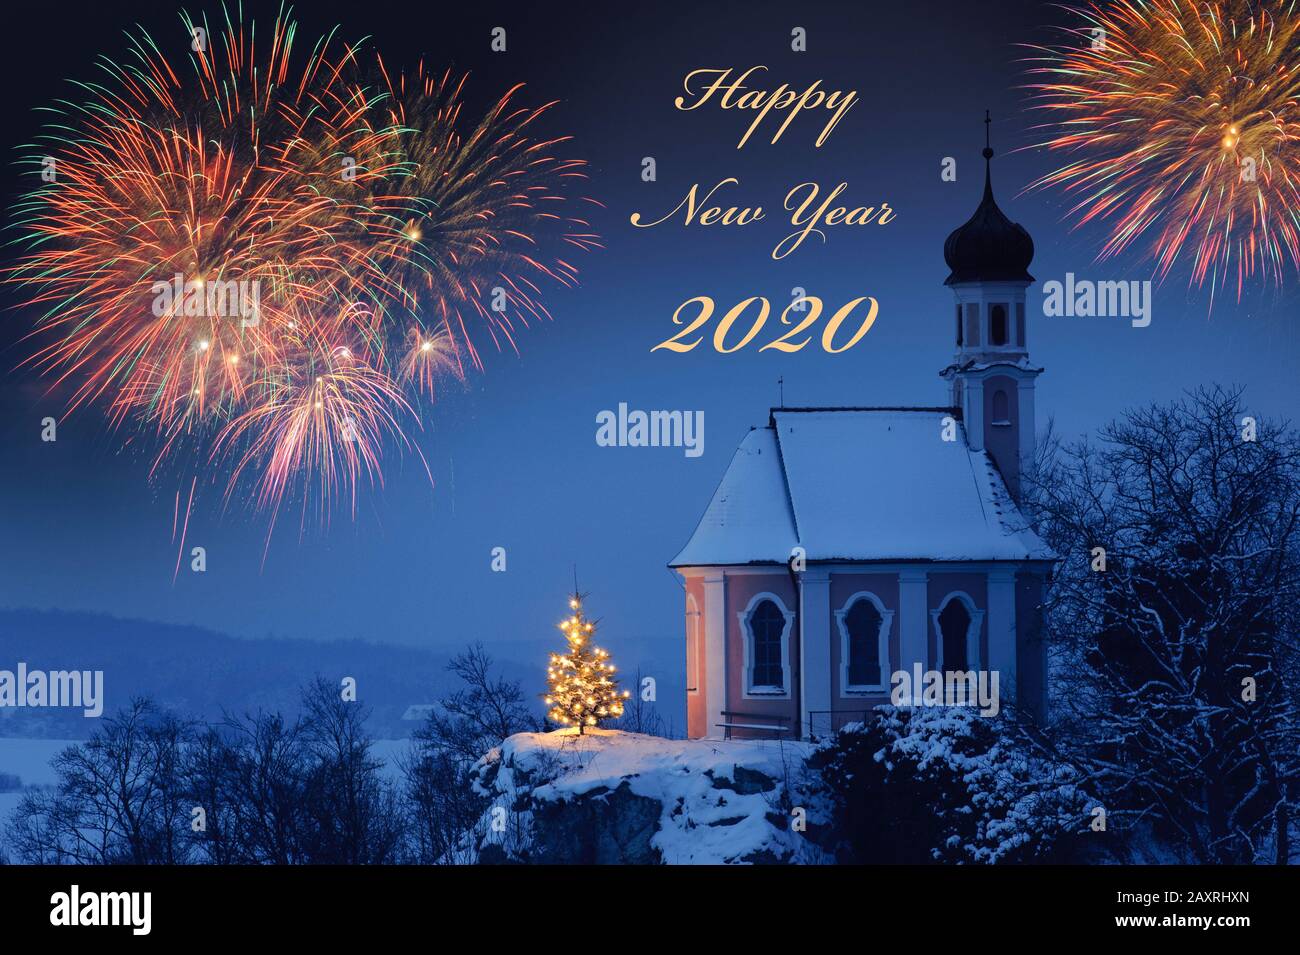 New Year's Eve and New Year 2020, greeting card with fireworks and ...